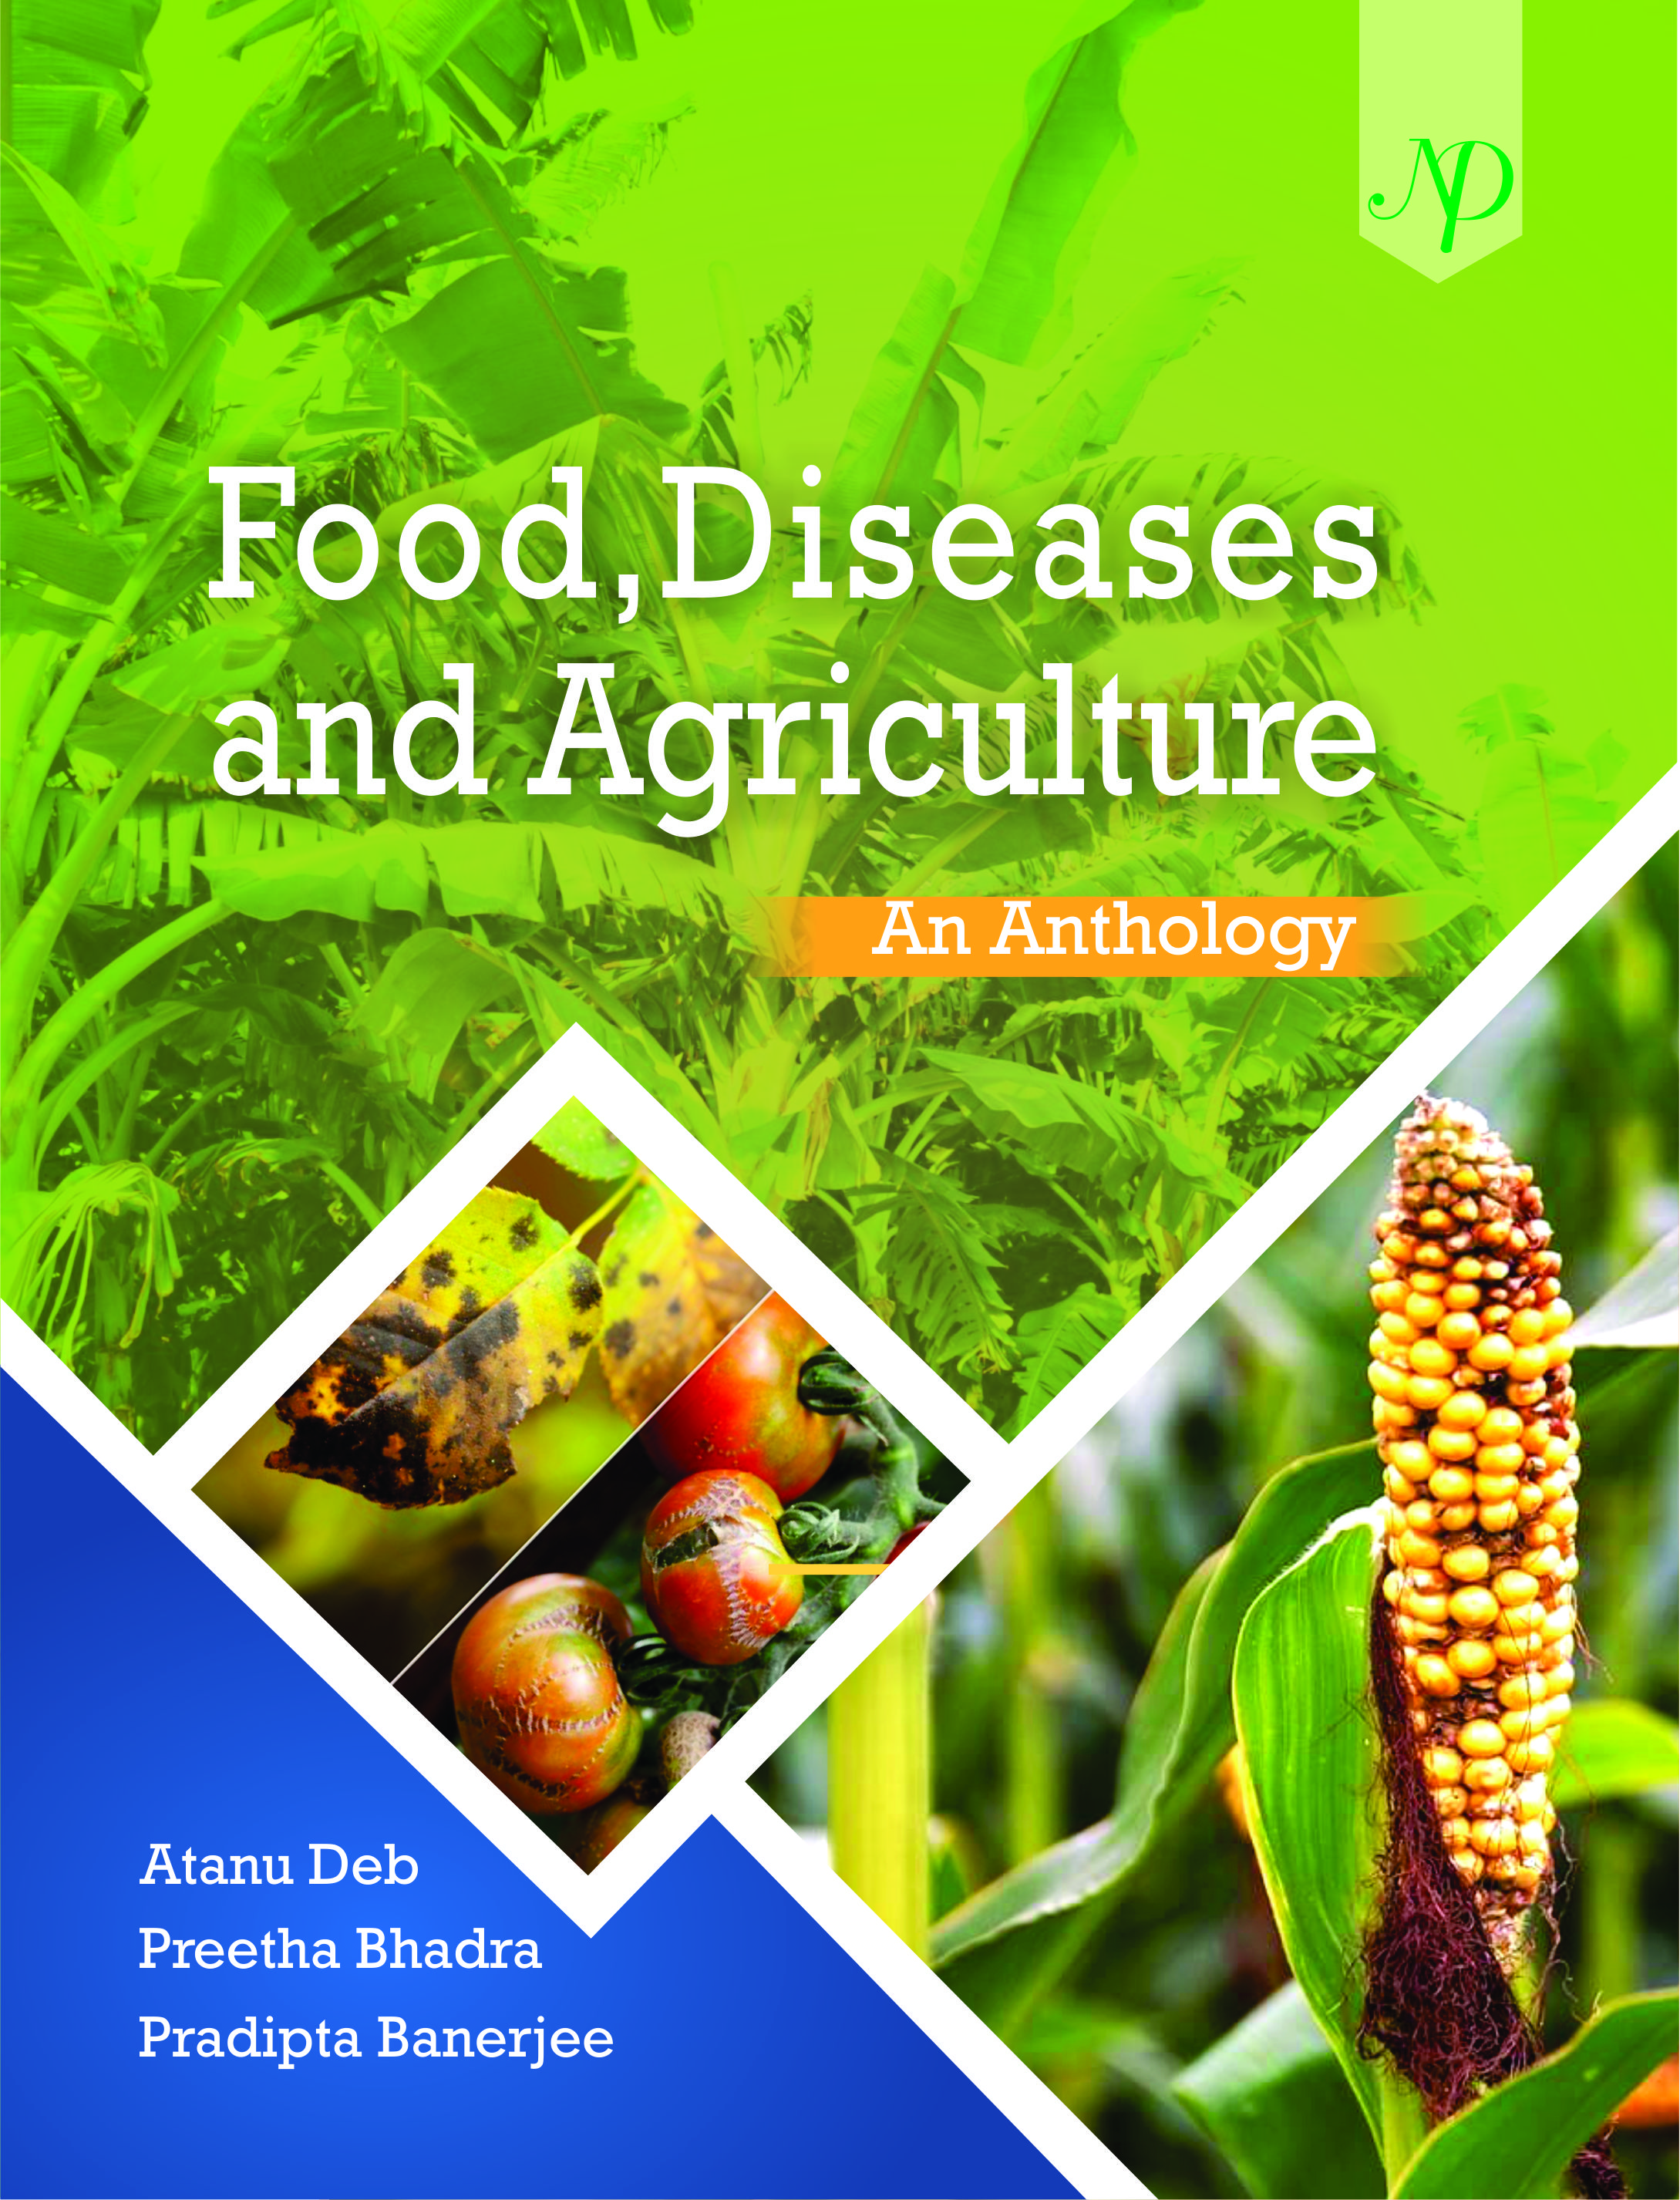 Food, Diseases and Agriculture- An Anthology